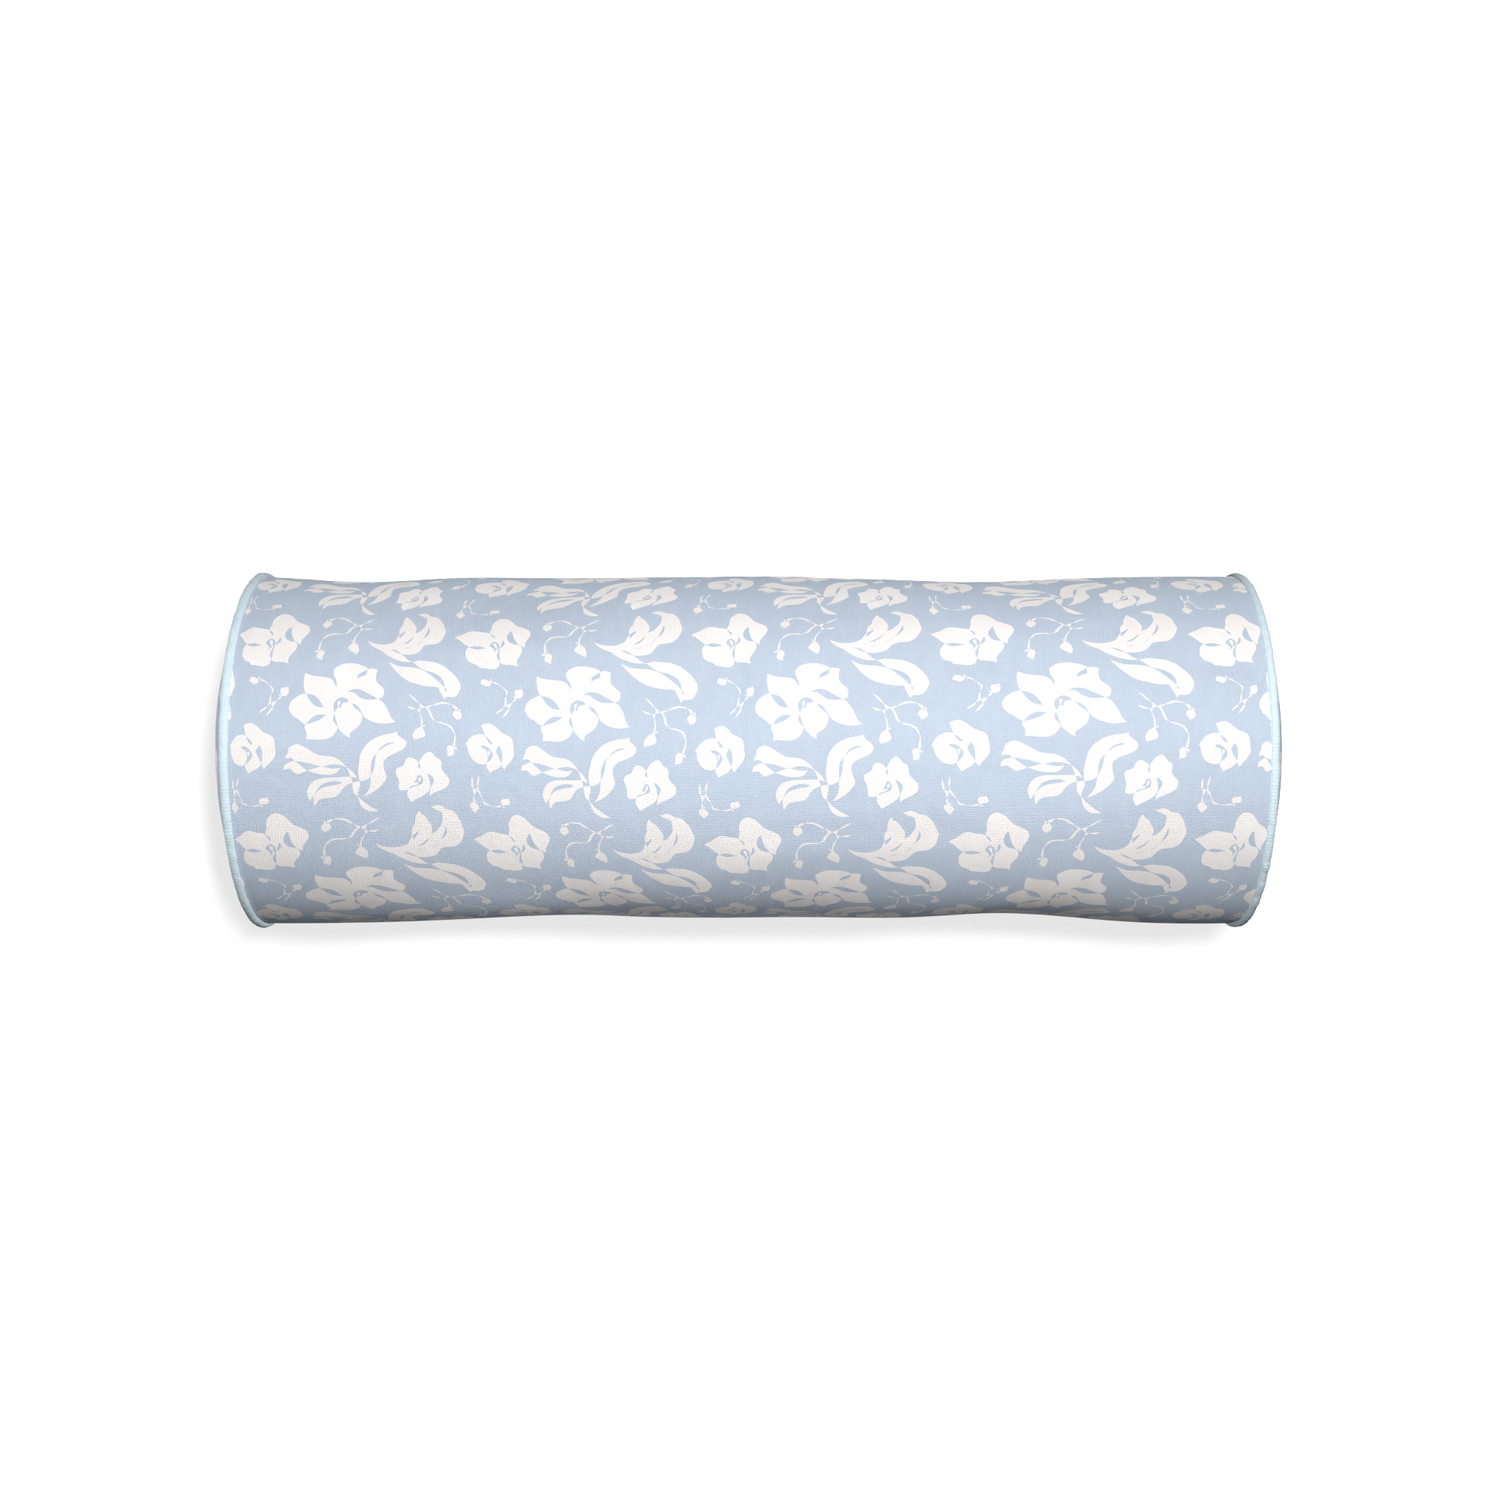 Bolster georgia custom pillow with powder piping on white background